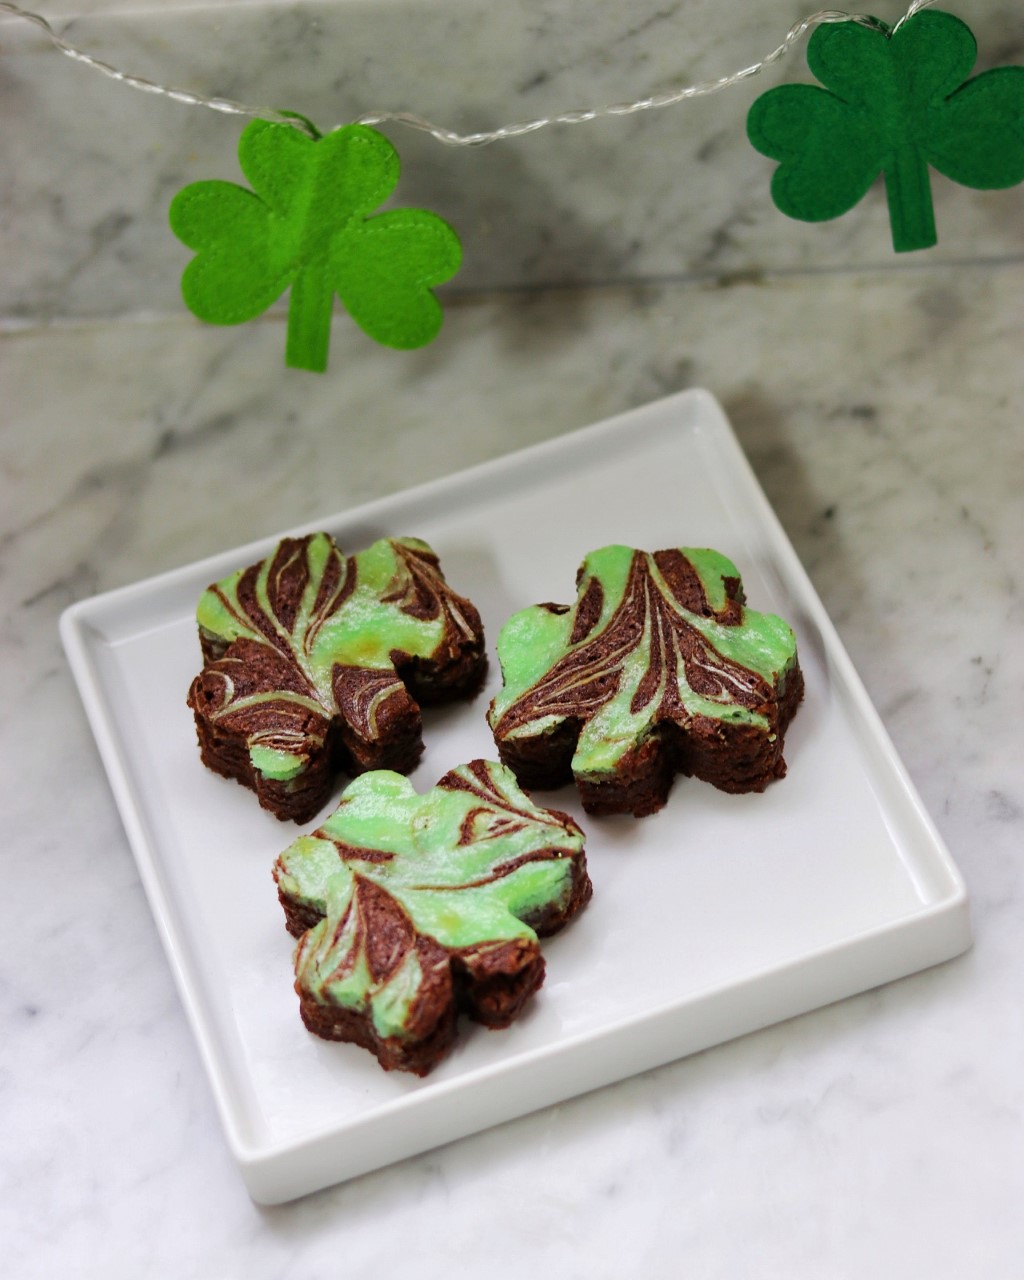 shamrock brownies recipe for st. paddy's day